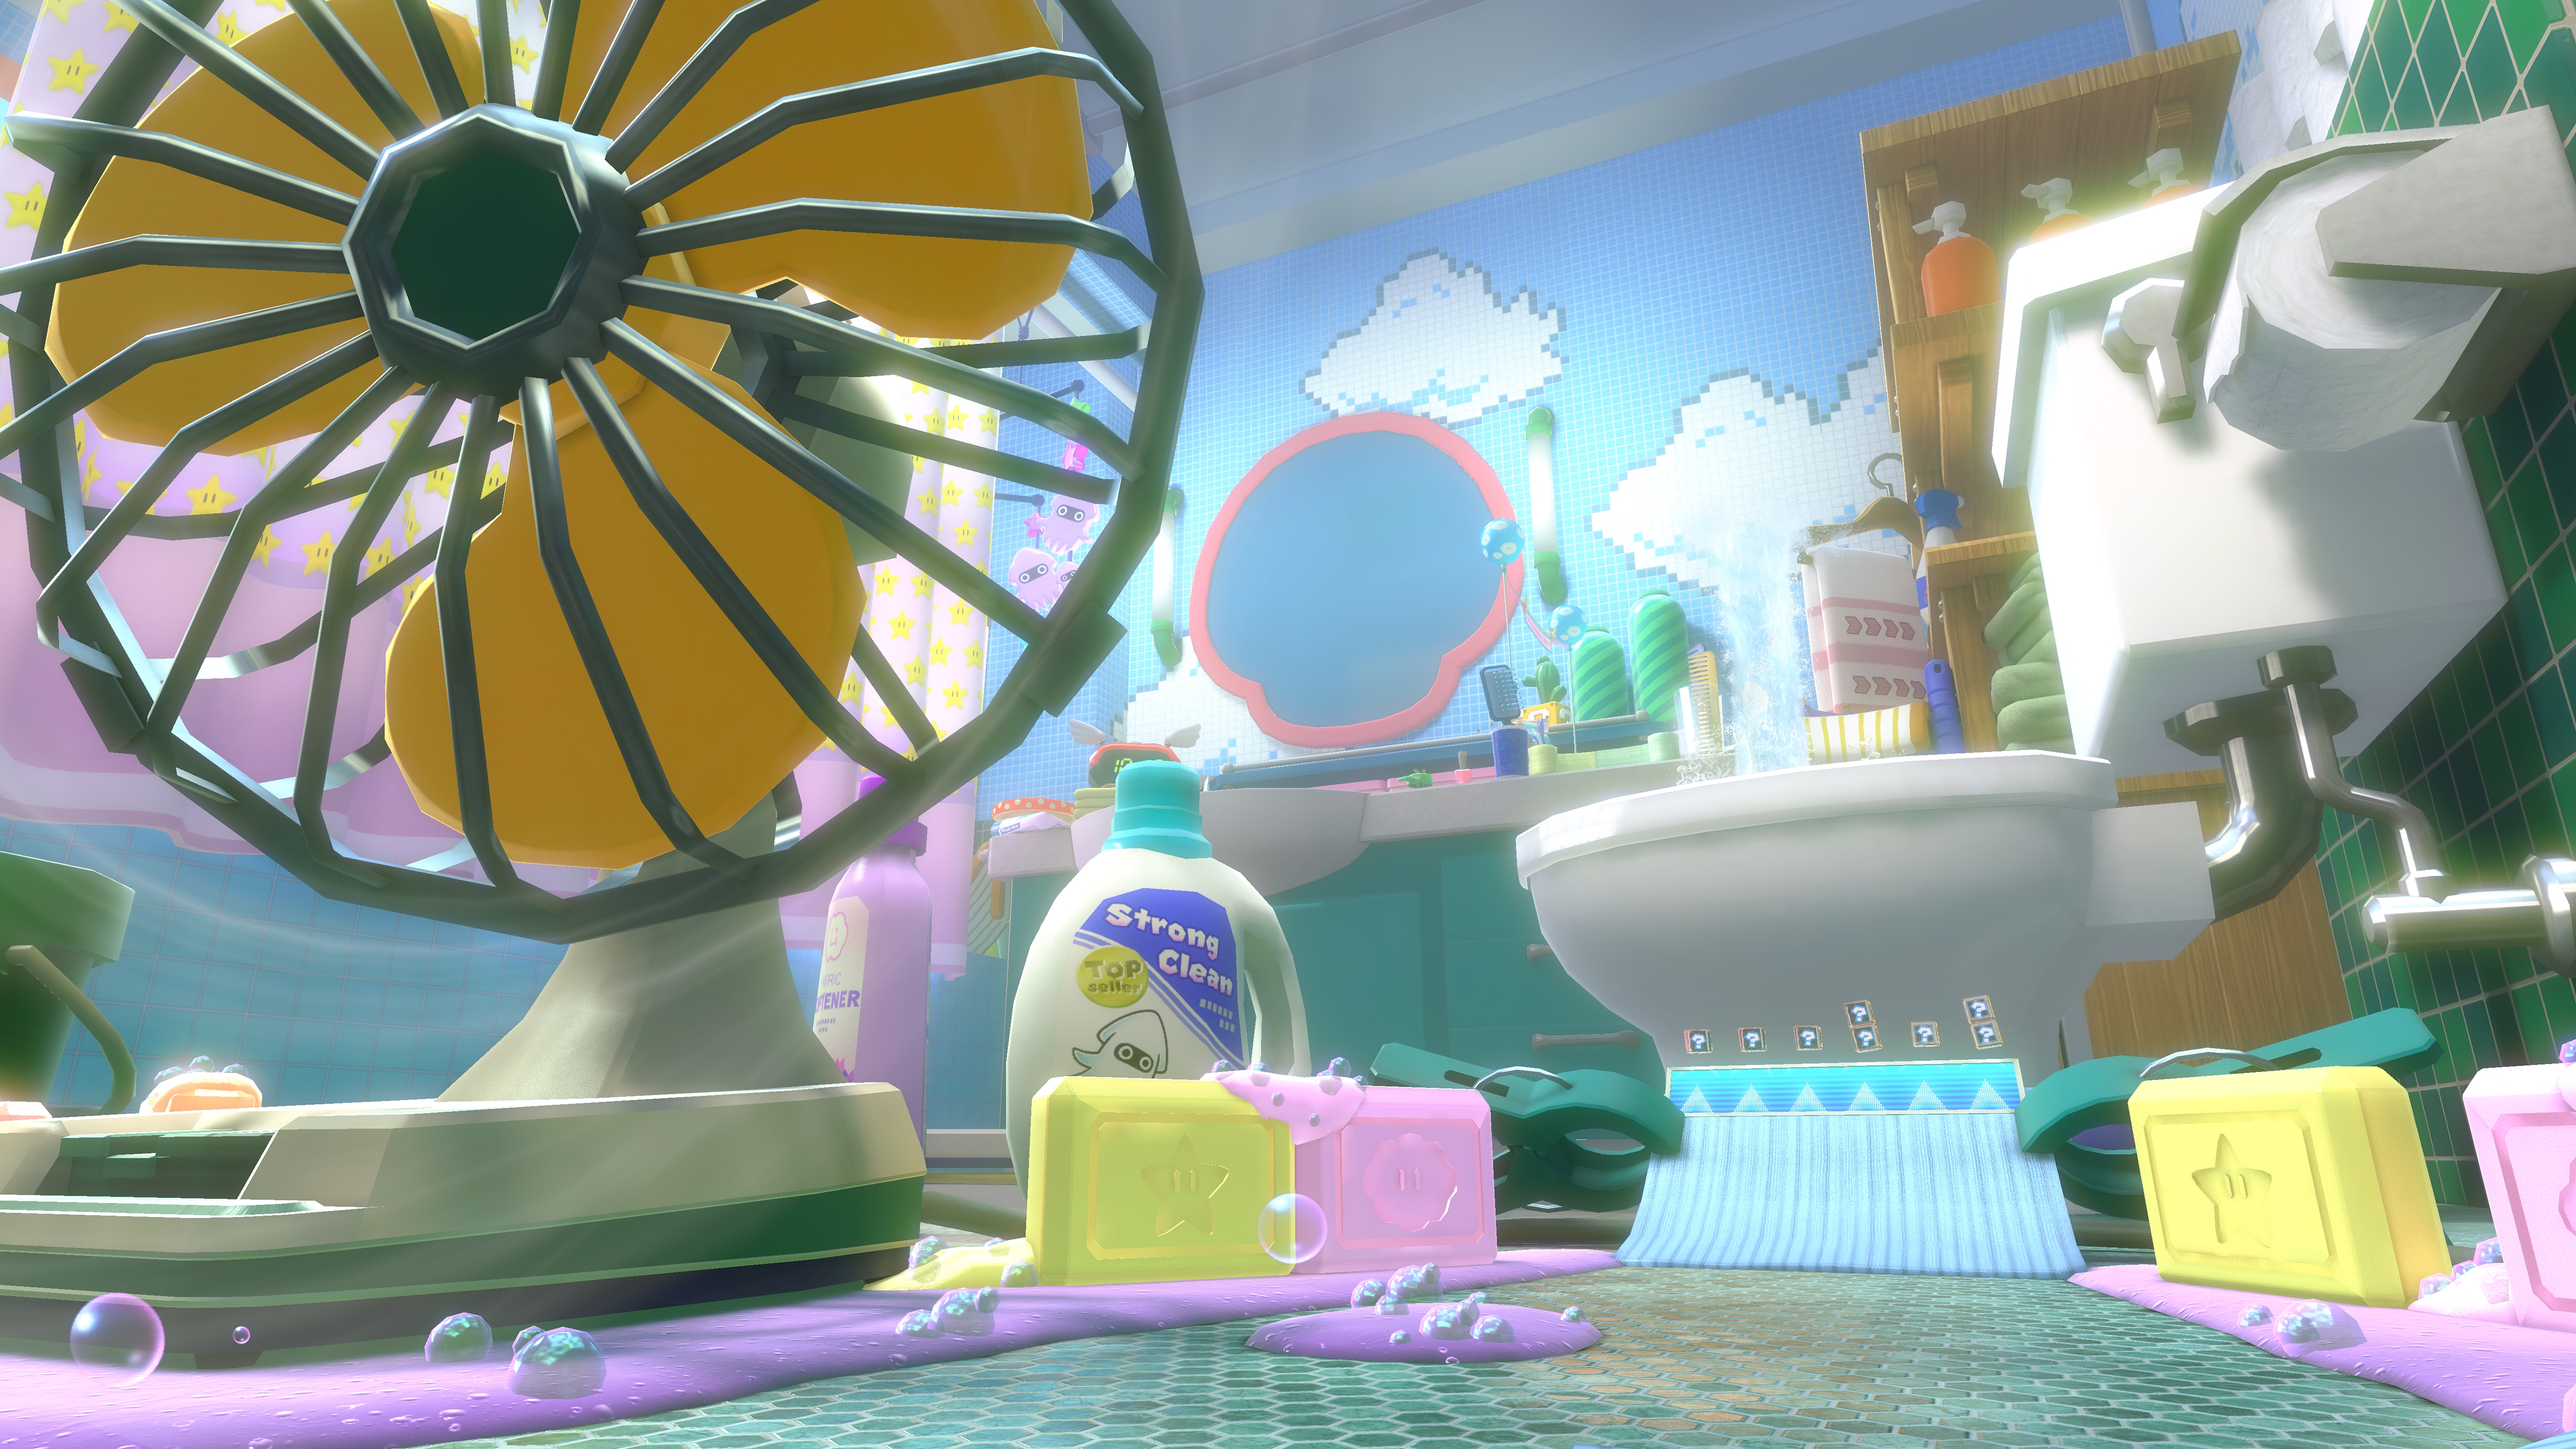 Kamek and Wiggler join Mario Kart 8 Deluxe Booster Course Pass this summer